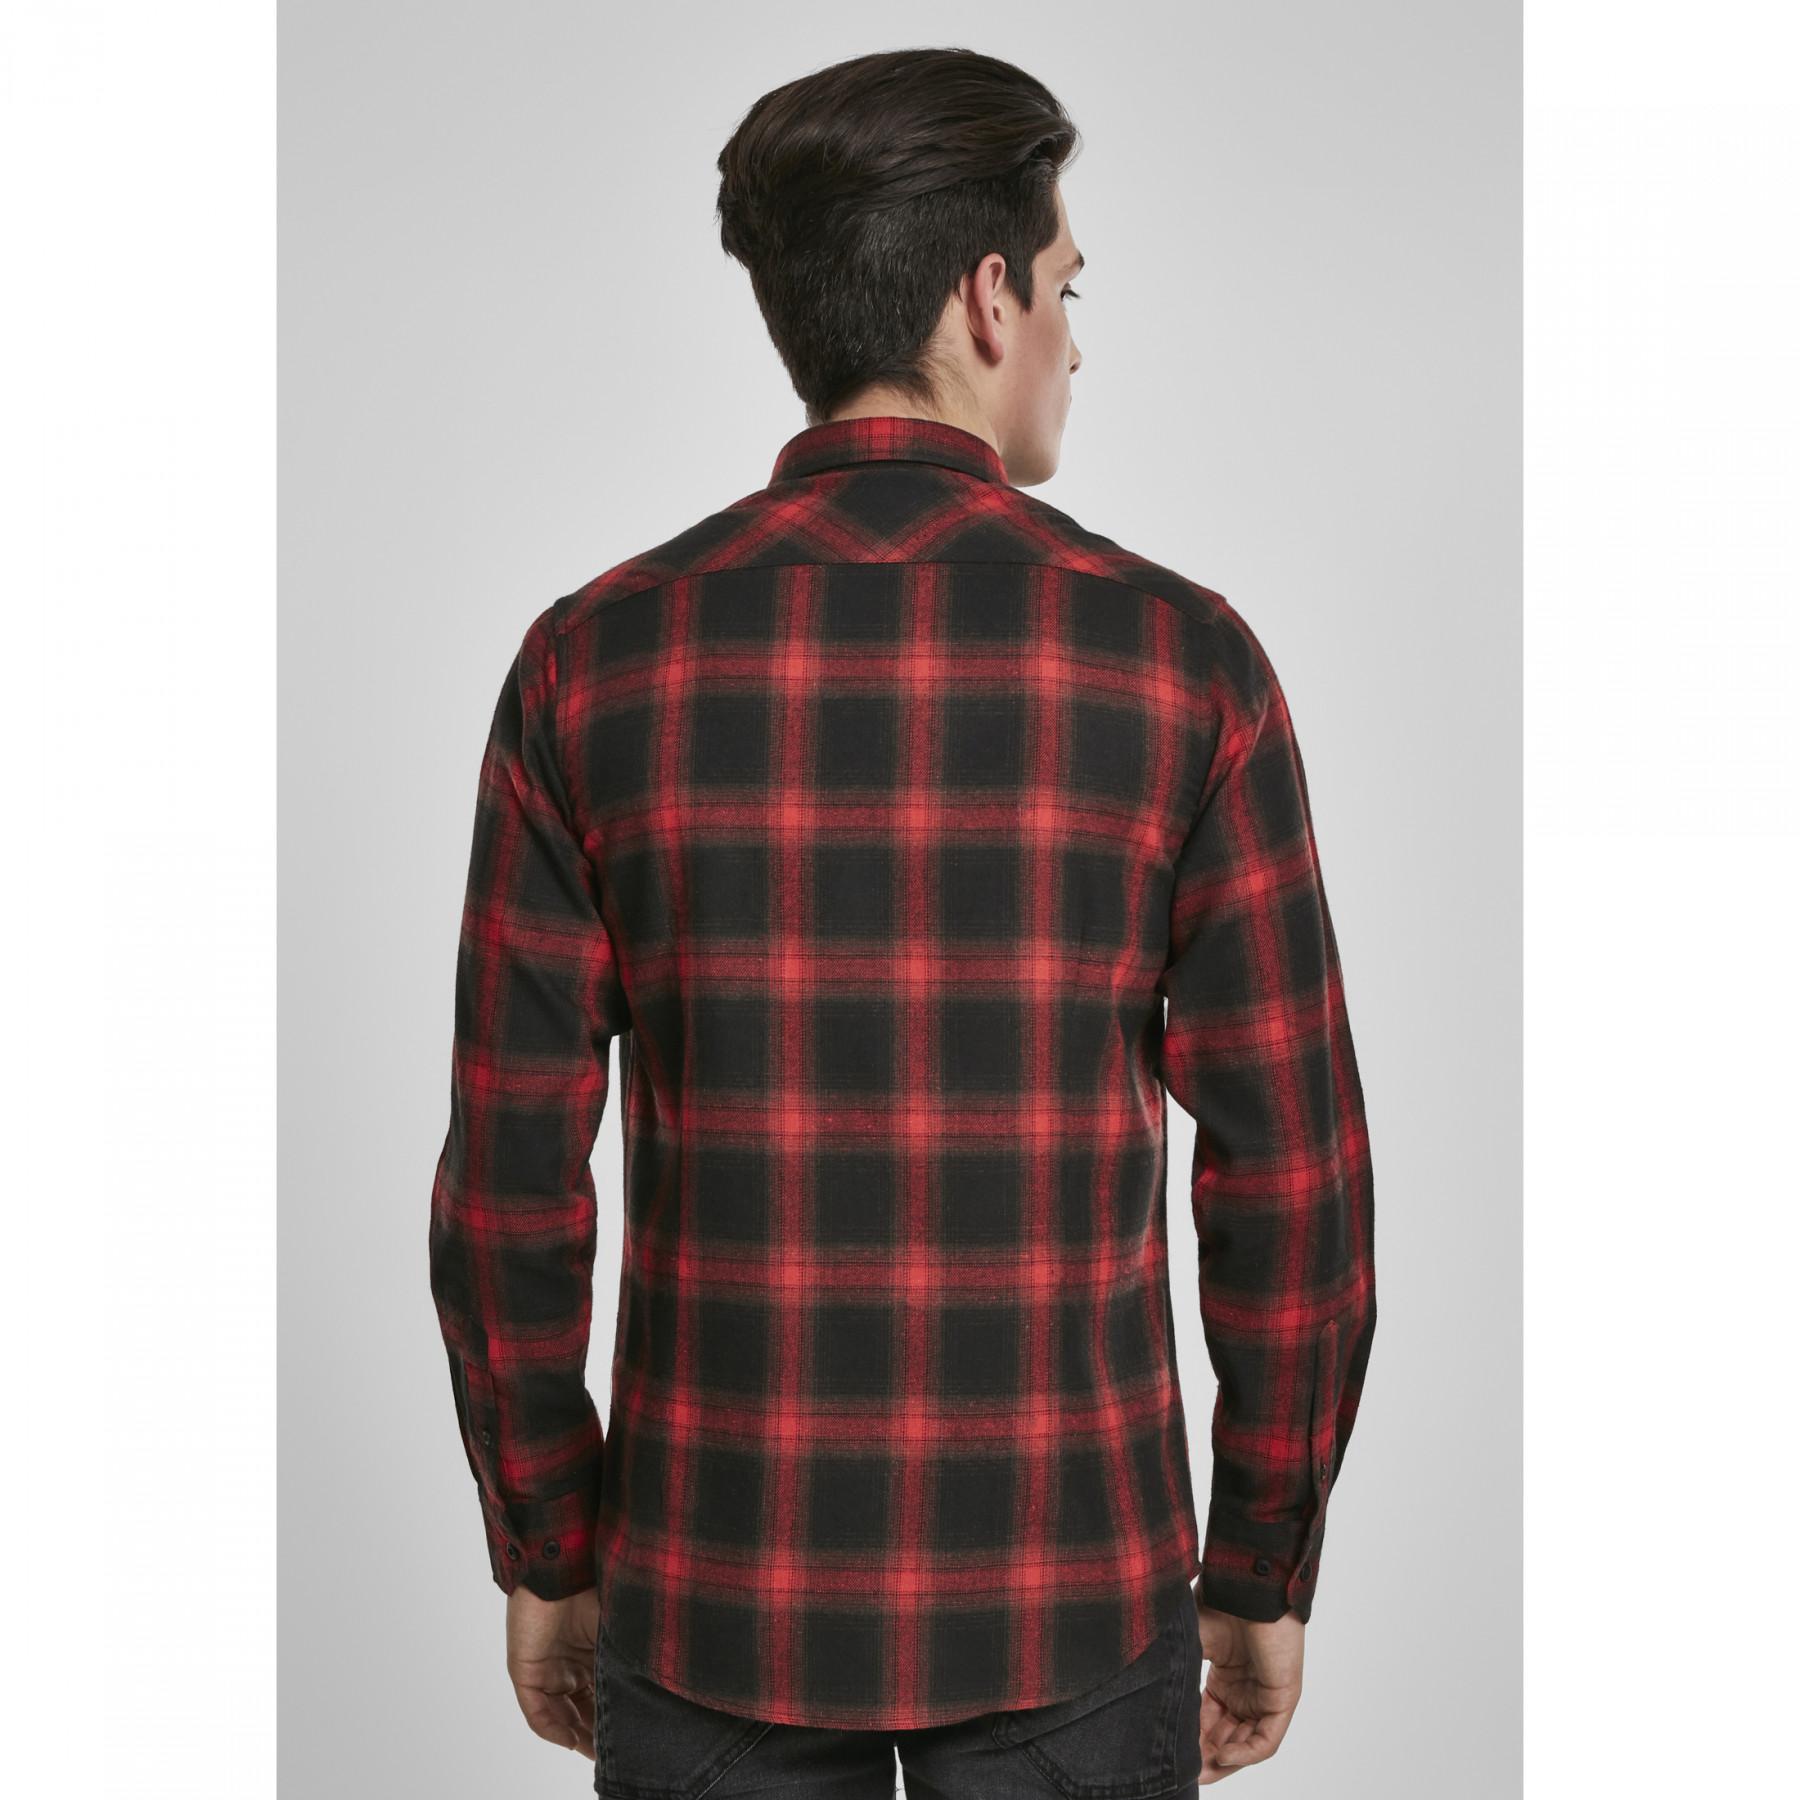 Chemise grandes tailles Urban Classic flanell 6